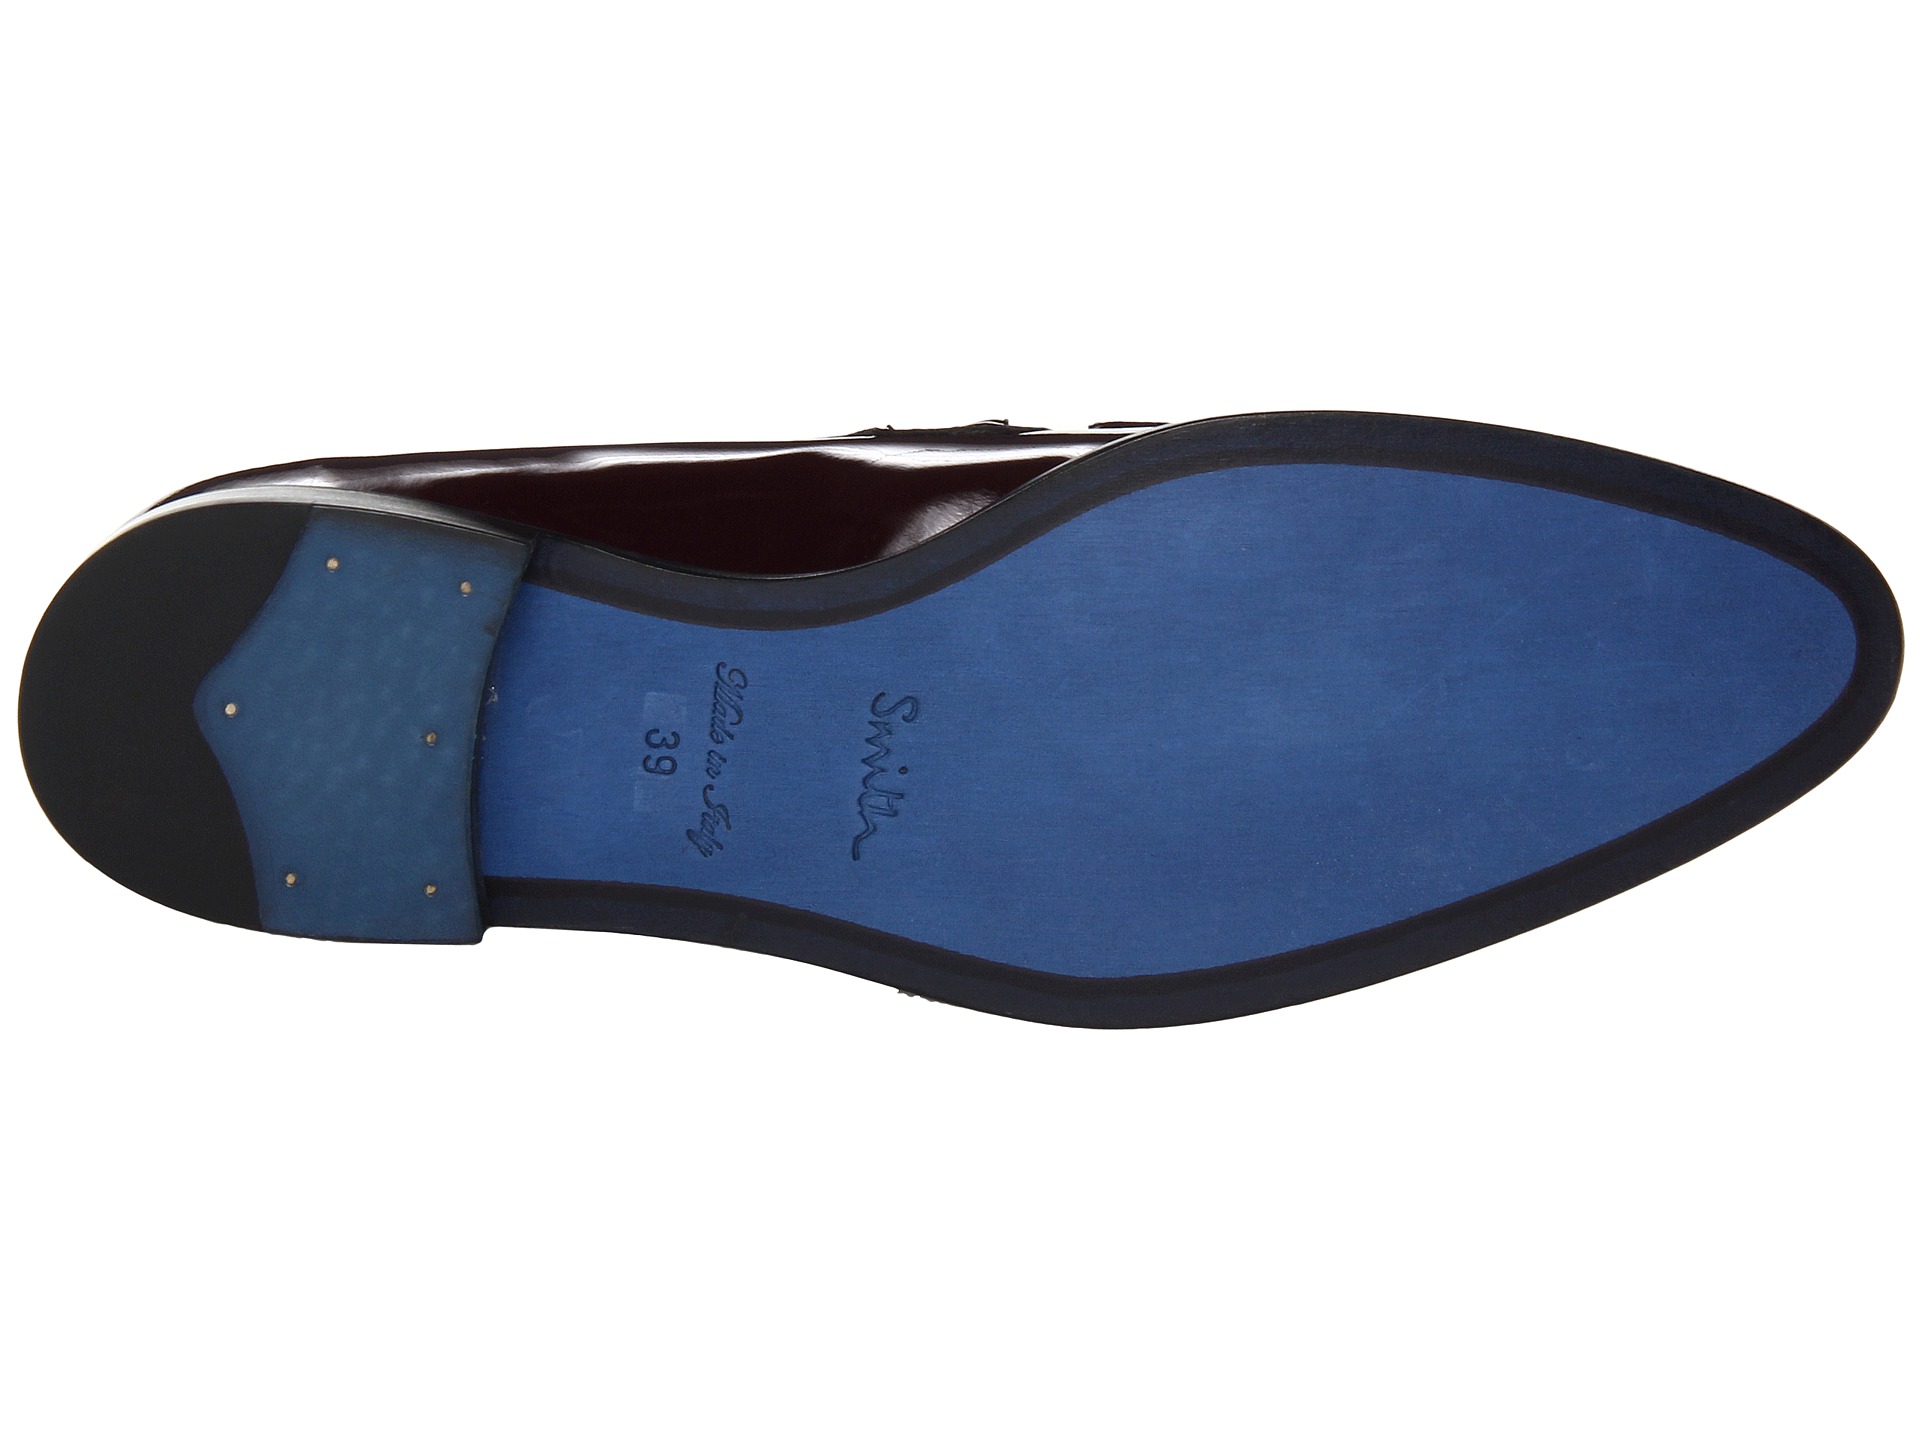 Paul Smith Men Only Waters Loafer Wine | Shipped Free at Zappos